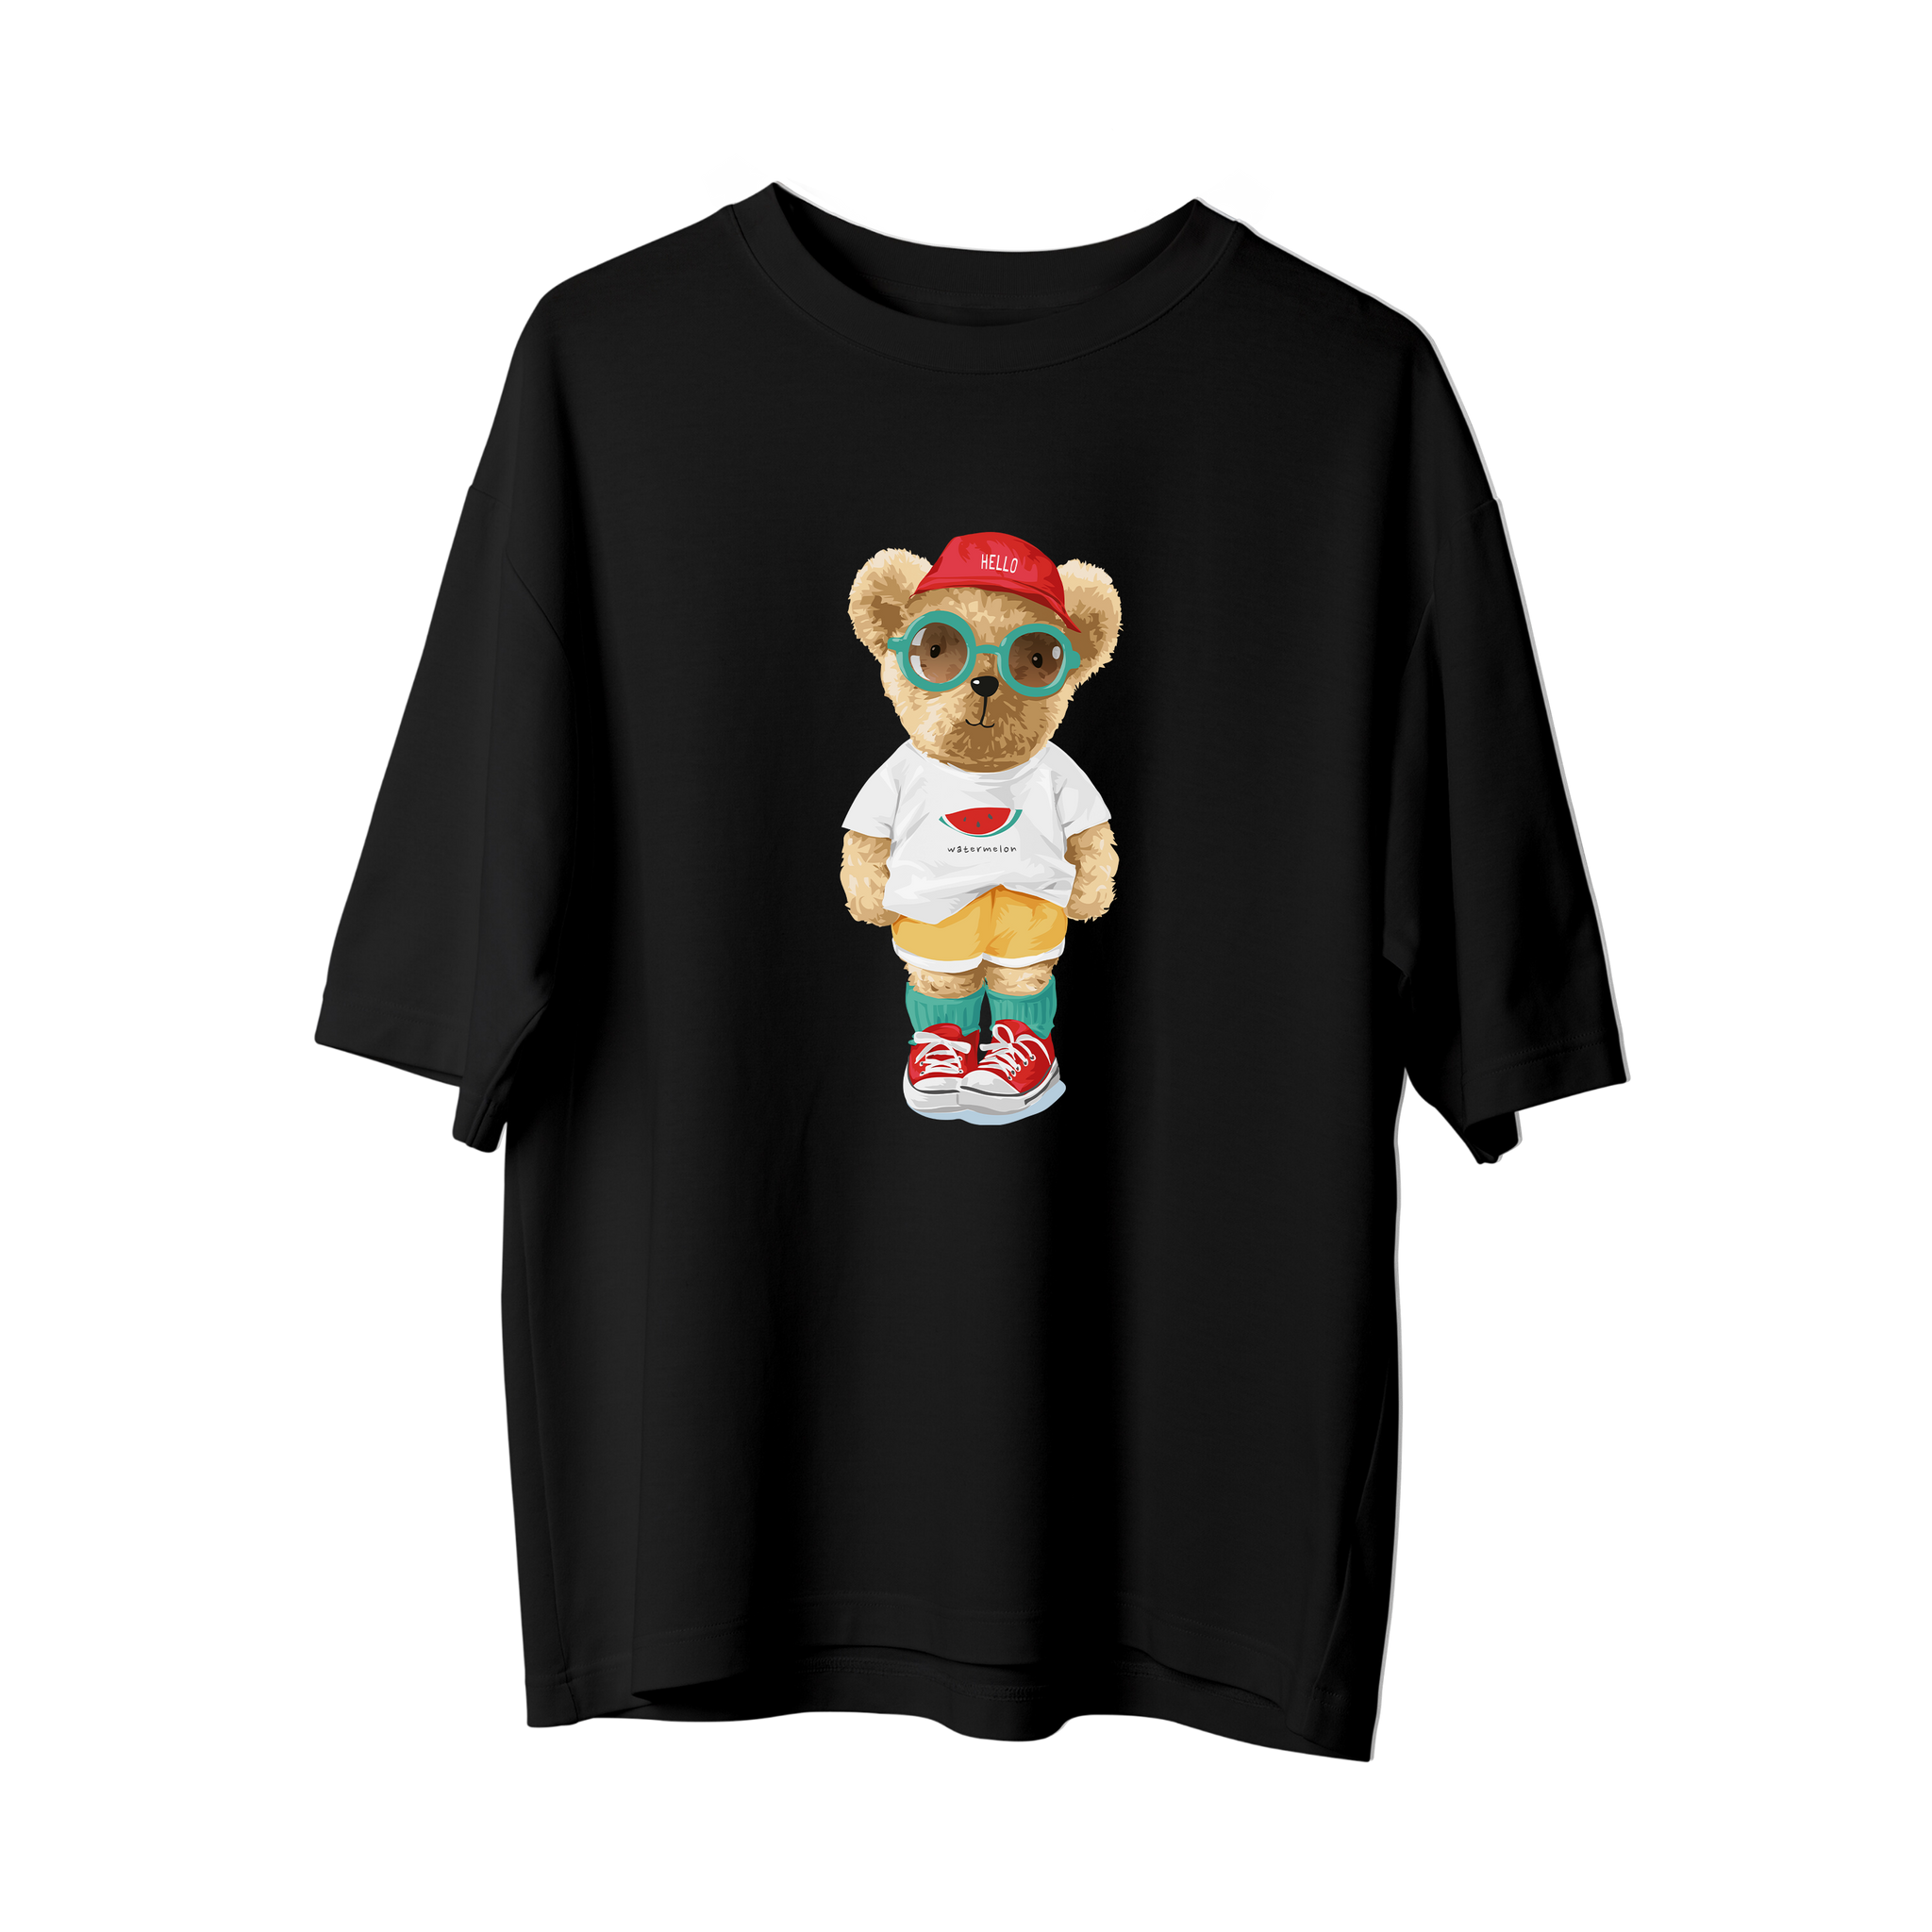 BEAR WITH GLASSES - Oversize T-Shirt